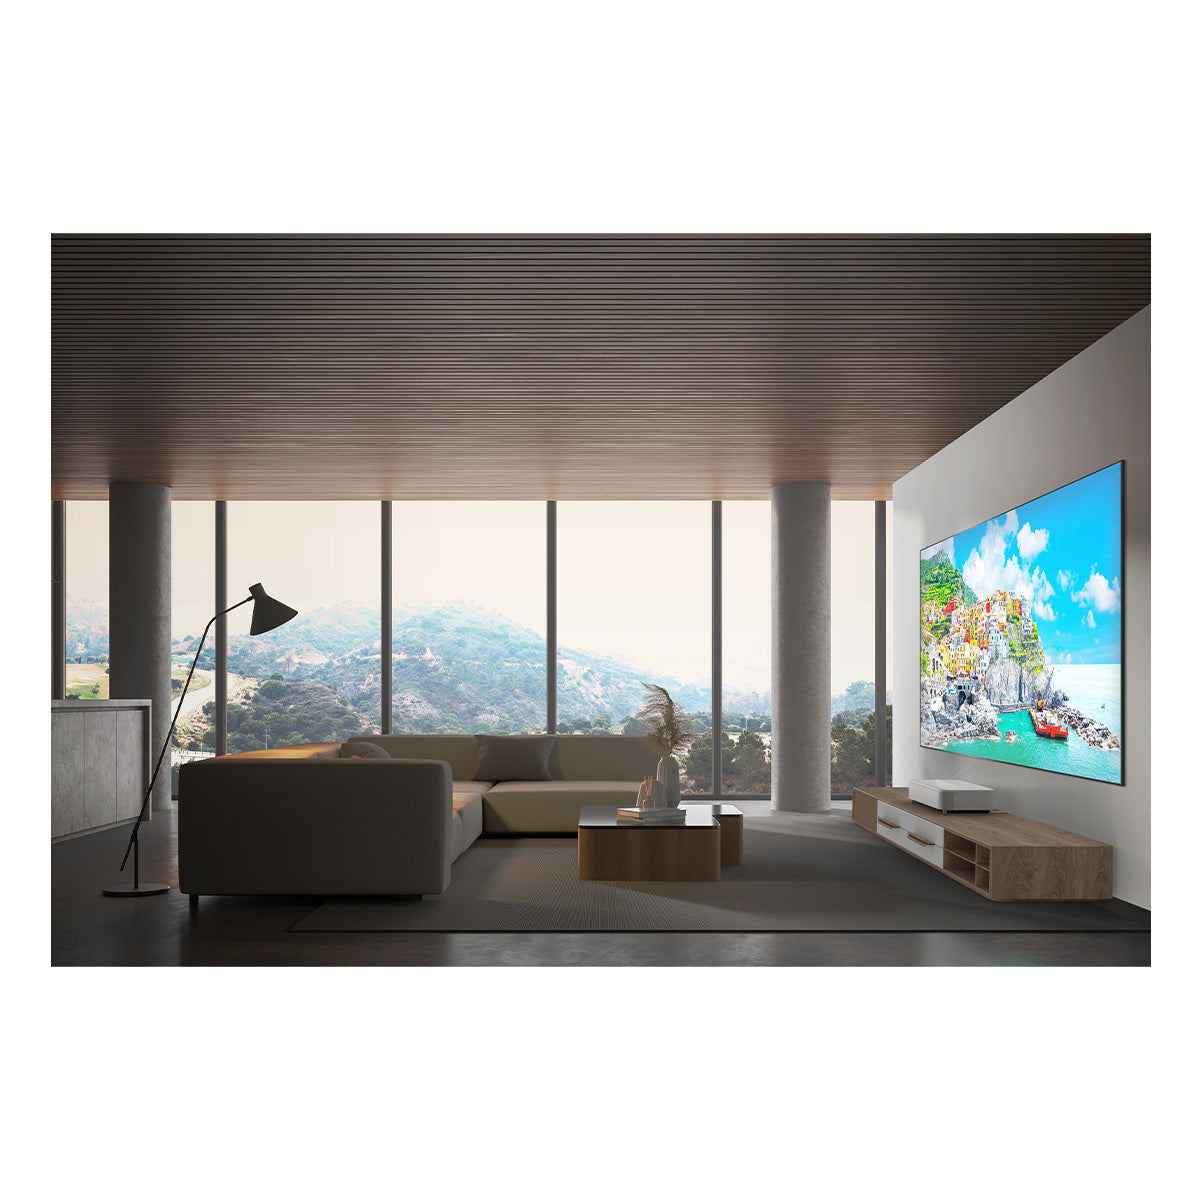 Epson EpiqVision LS800 Ultra Short-Throw 4K PRO-UHD 3-Chip Laser Projector with Smart Streaming (White)